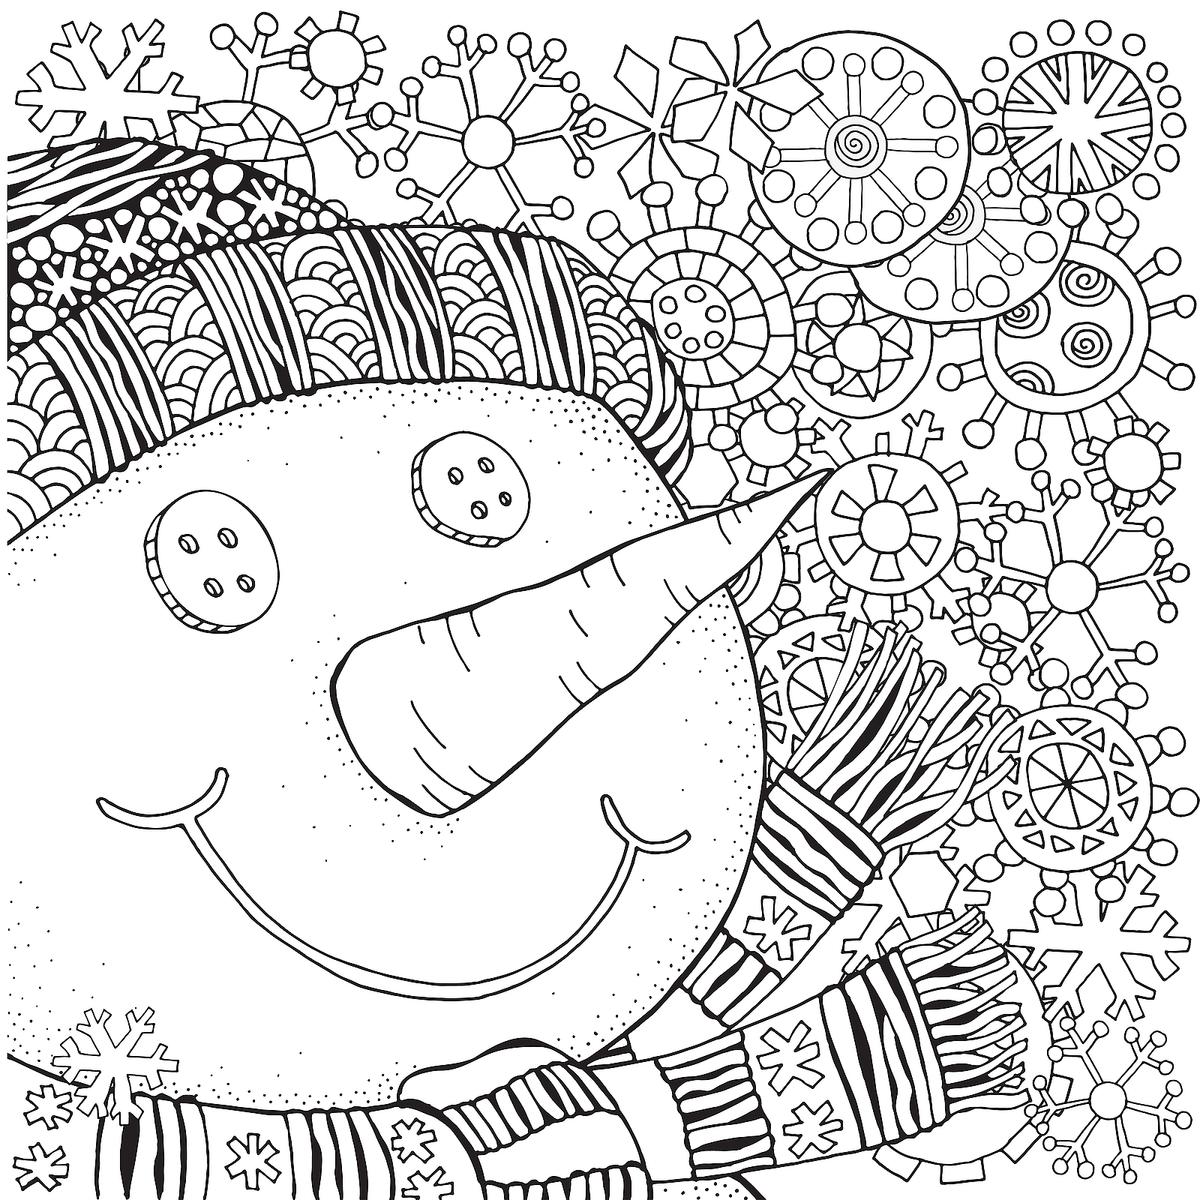 Snowman coloring pages printable coloring pages of snowmen for kids printables mom